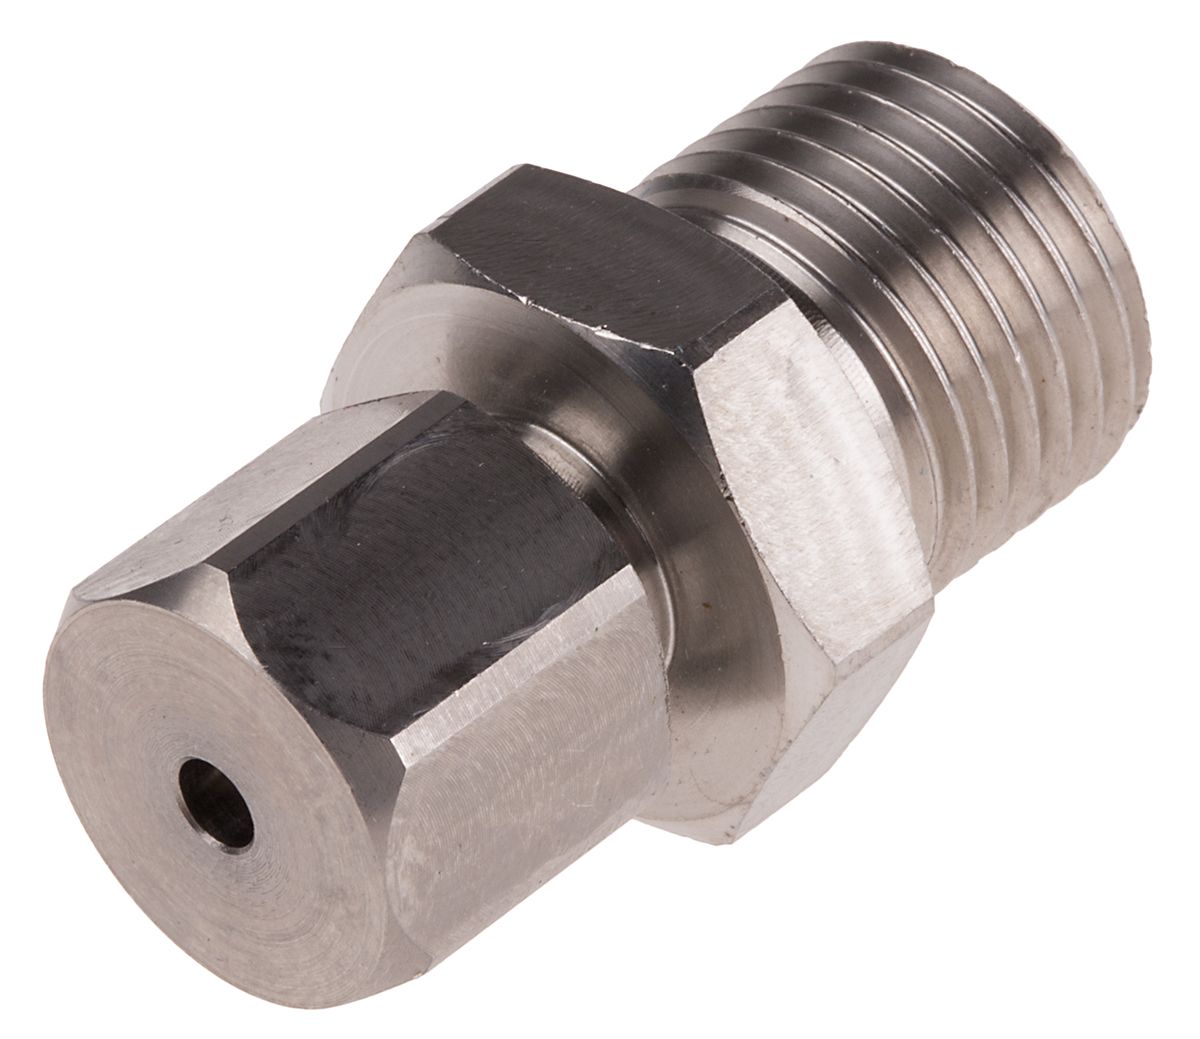 RS PRO In-Line Thermocouple Compression Fitting for Use with Thermocouple, M16, 3mm Probe, RoHS Compliant Standard